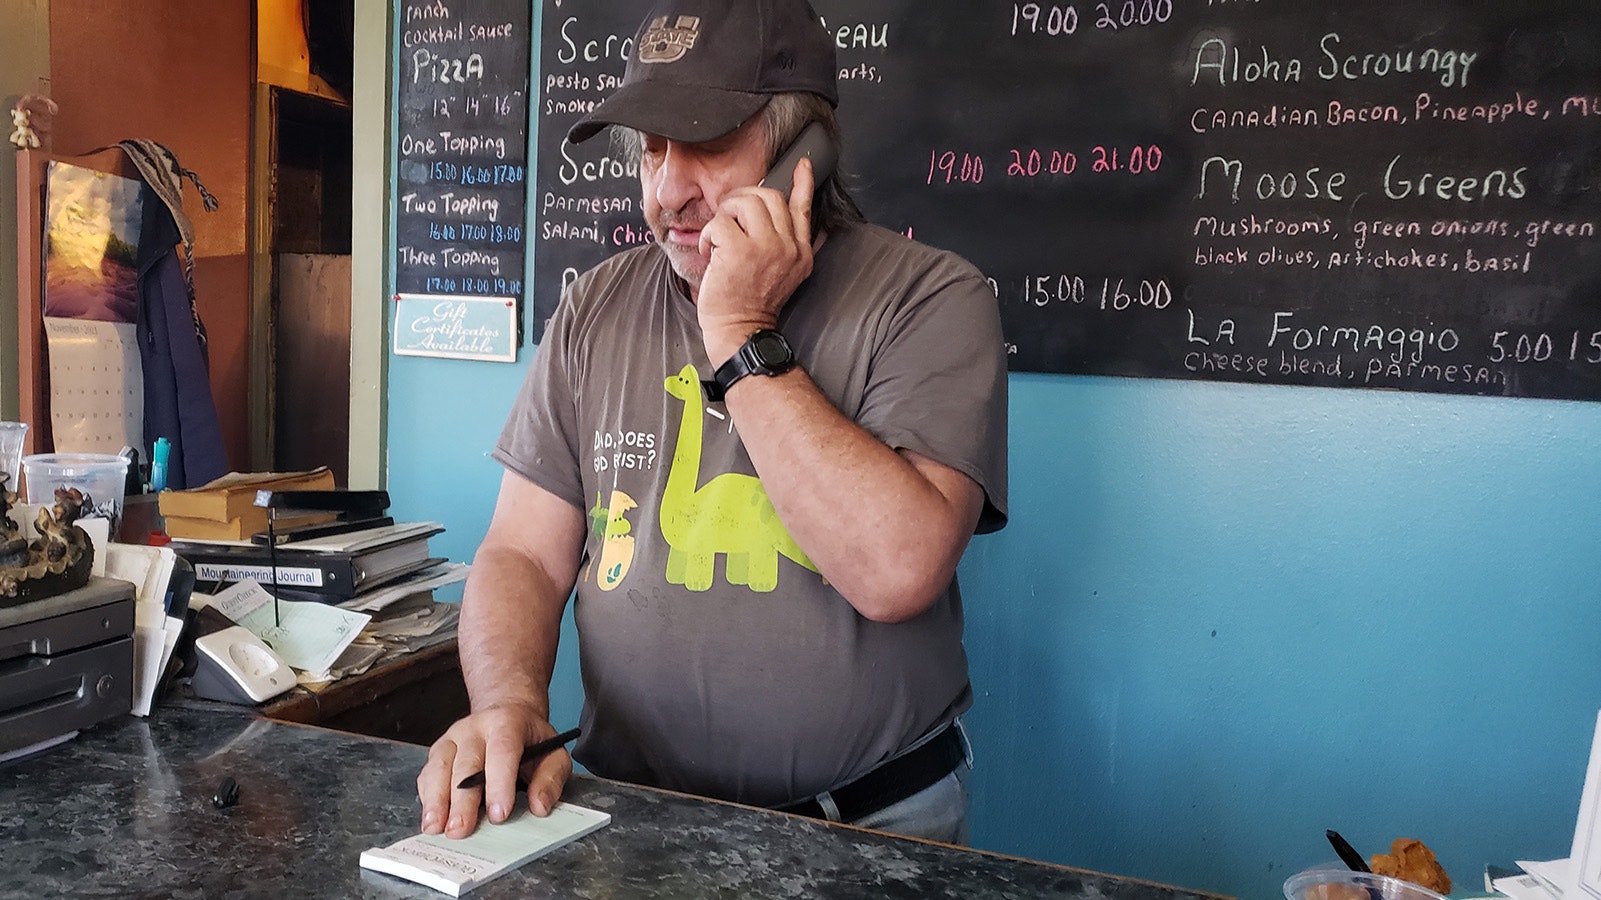 Tracy Carotta takes an order for pizza at his take-out joint in Kemmerer, Wyoming, Scroungy Moose Pizza.